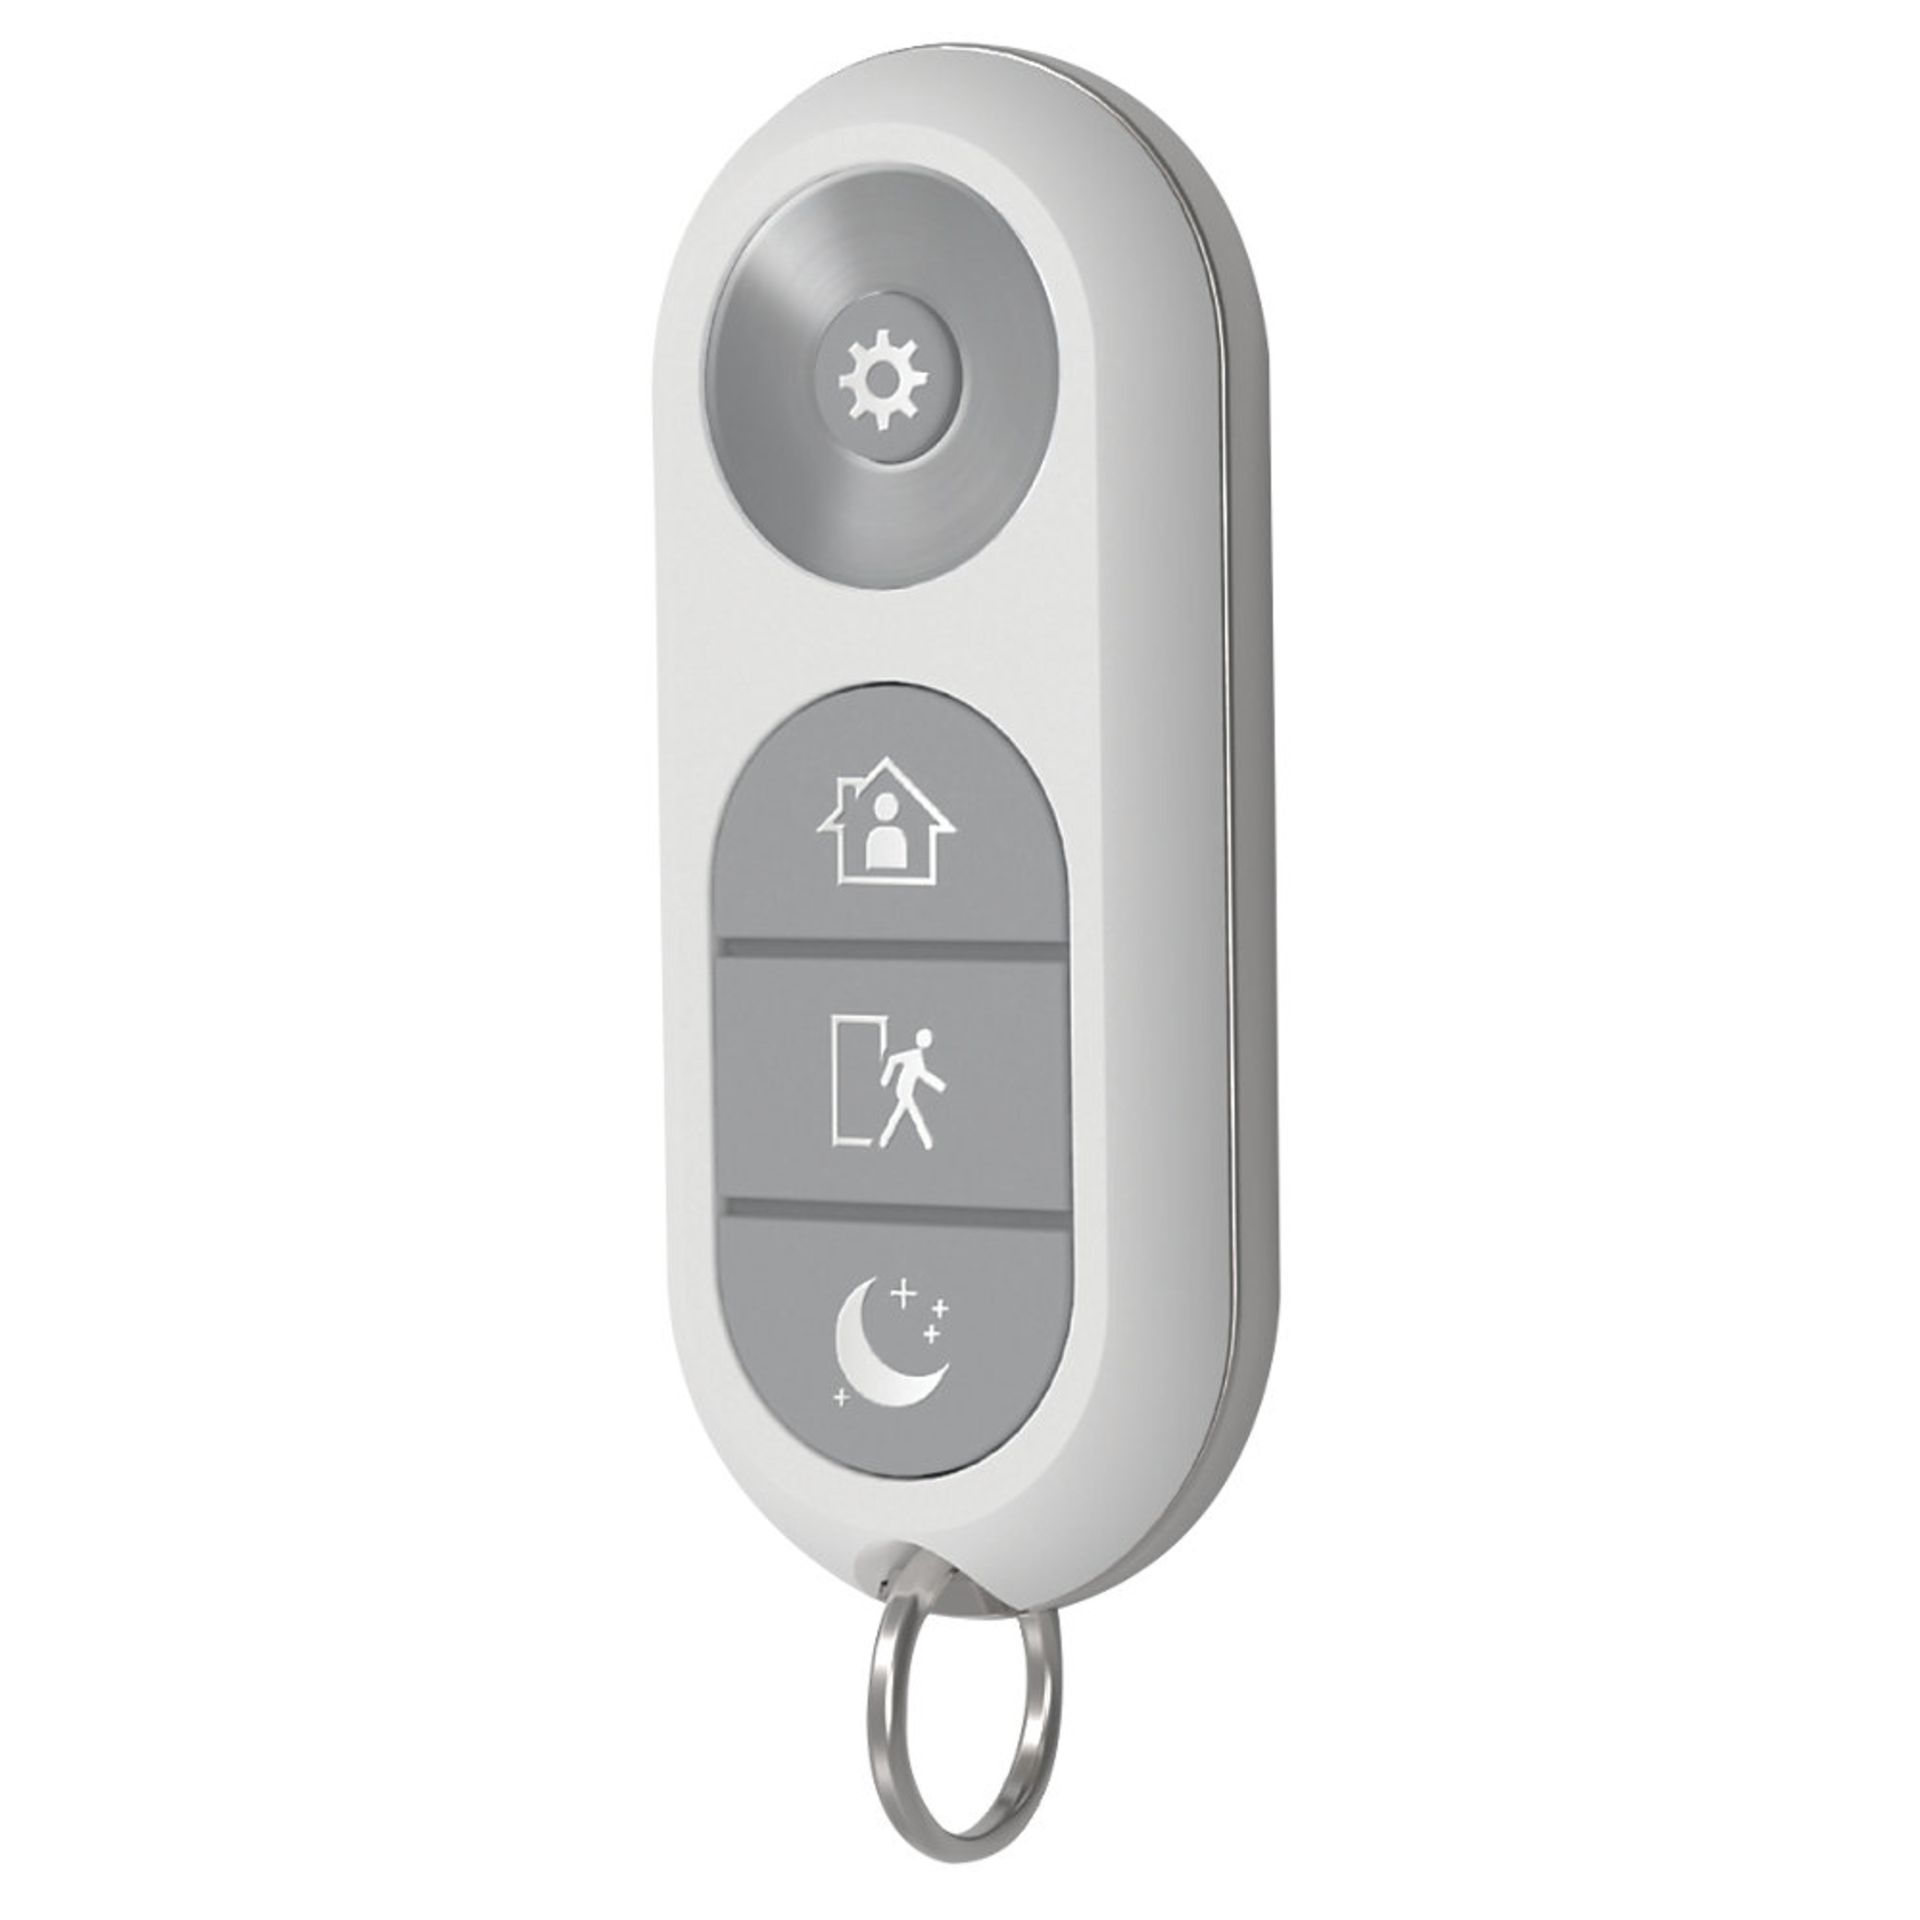 V Grade A Swann One Remote Control Key Fob to Control Your Swann One Security and Camera System -